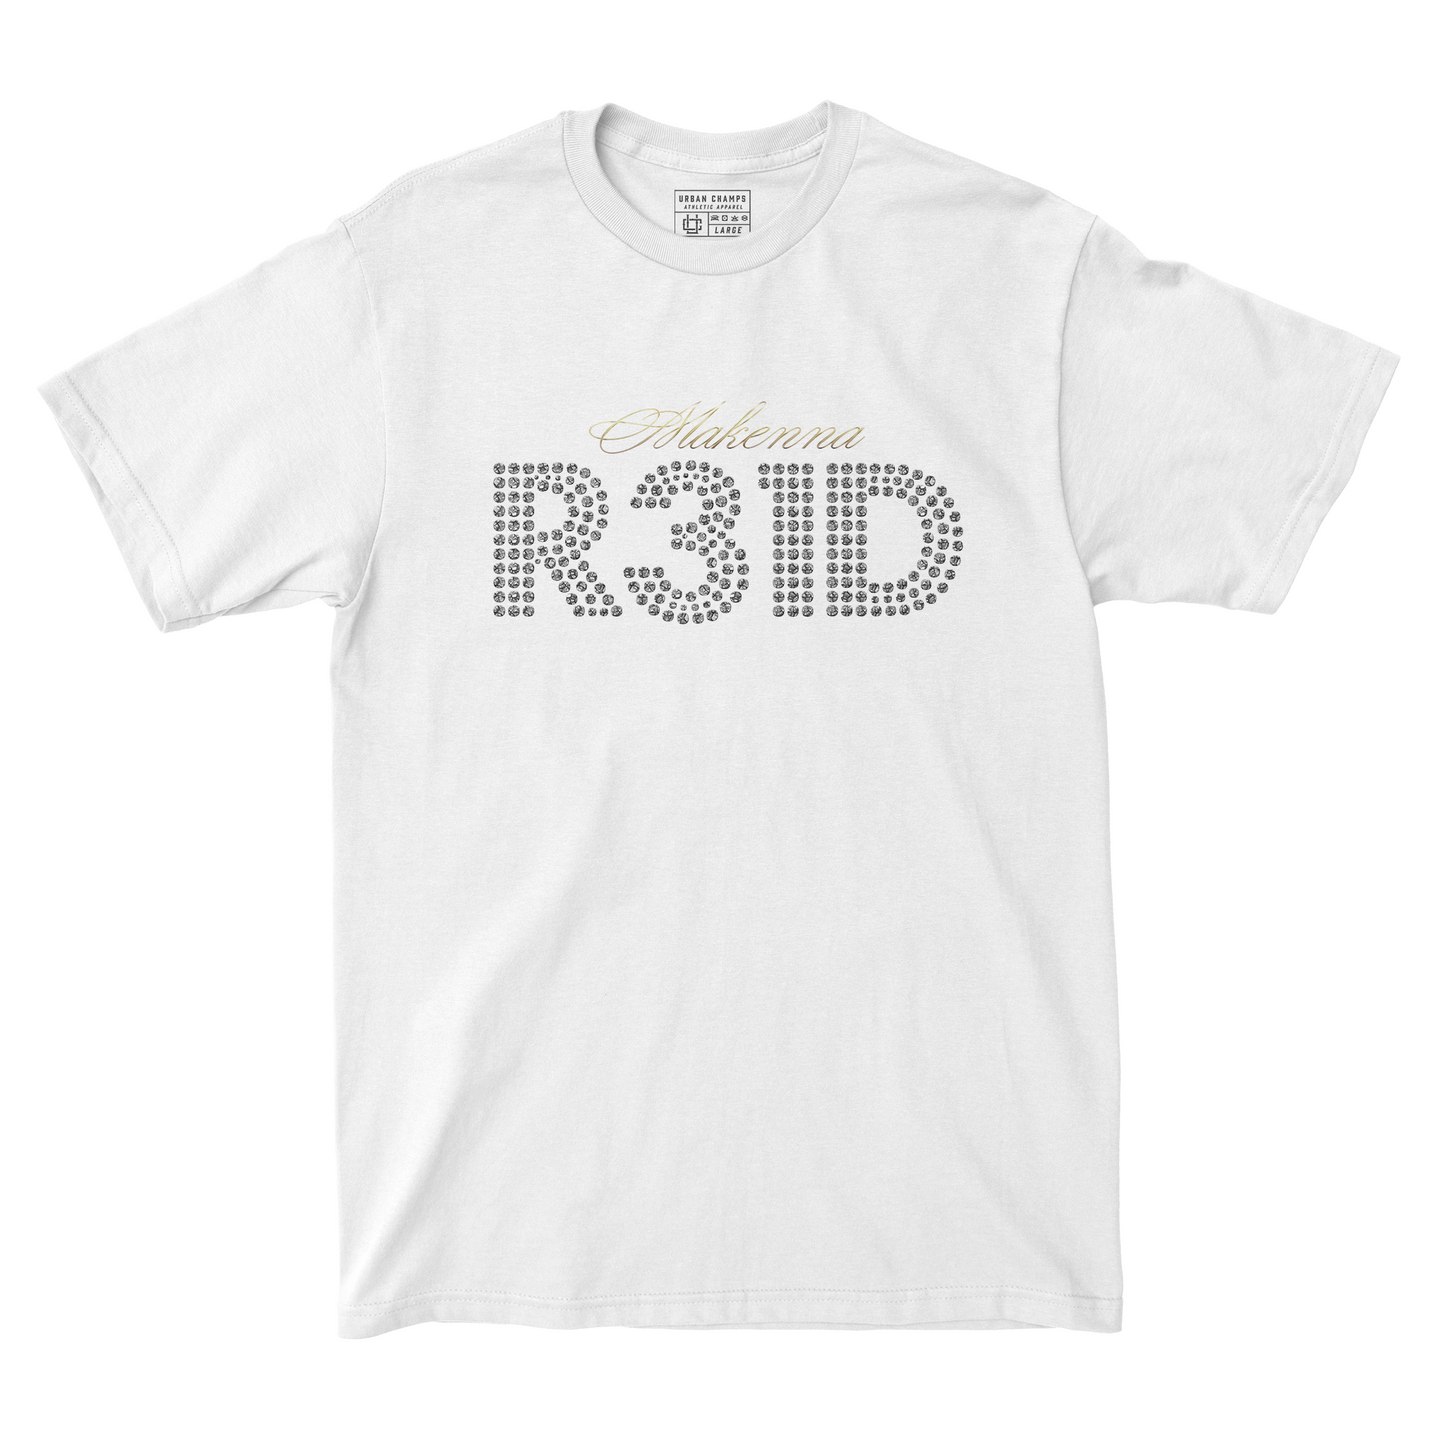 EXCLUSIVE RELEASE: Makenna R31D Signature White Tee